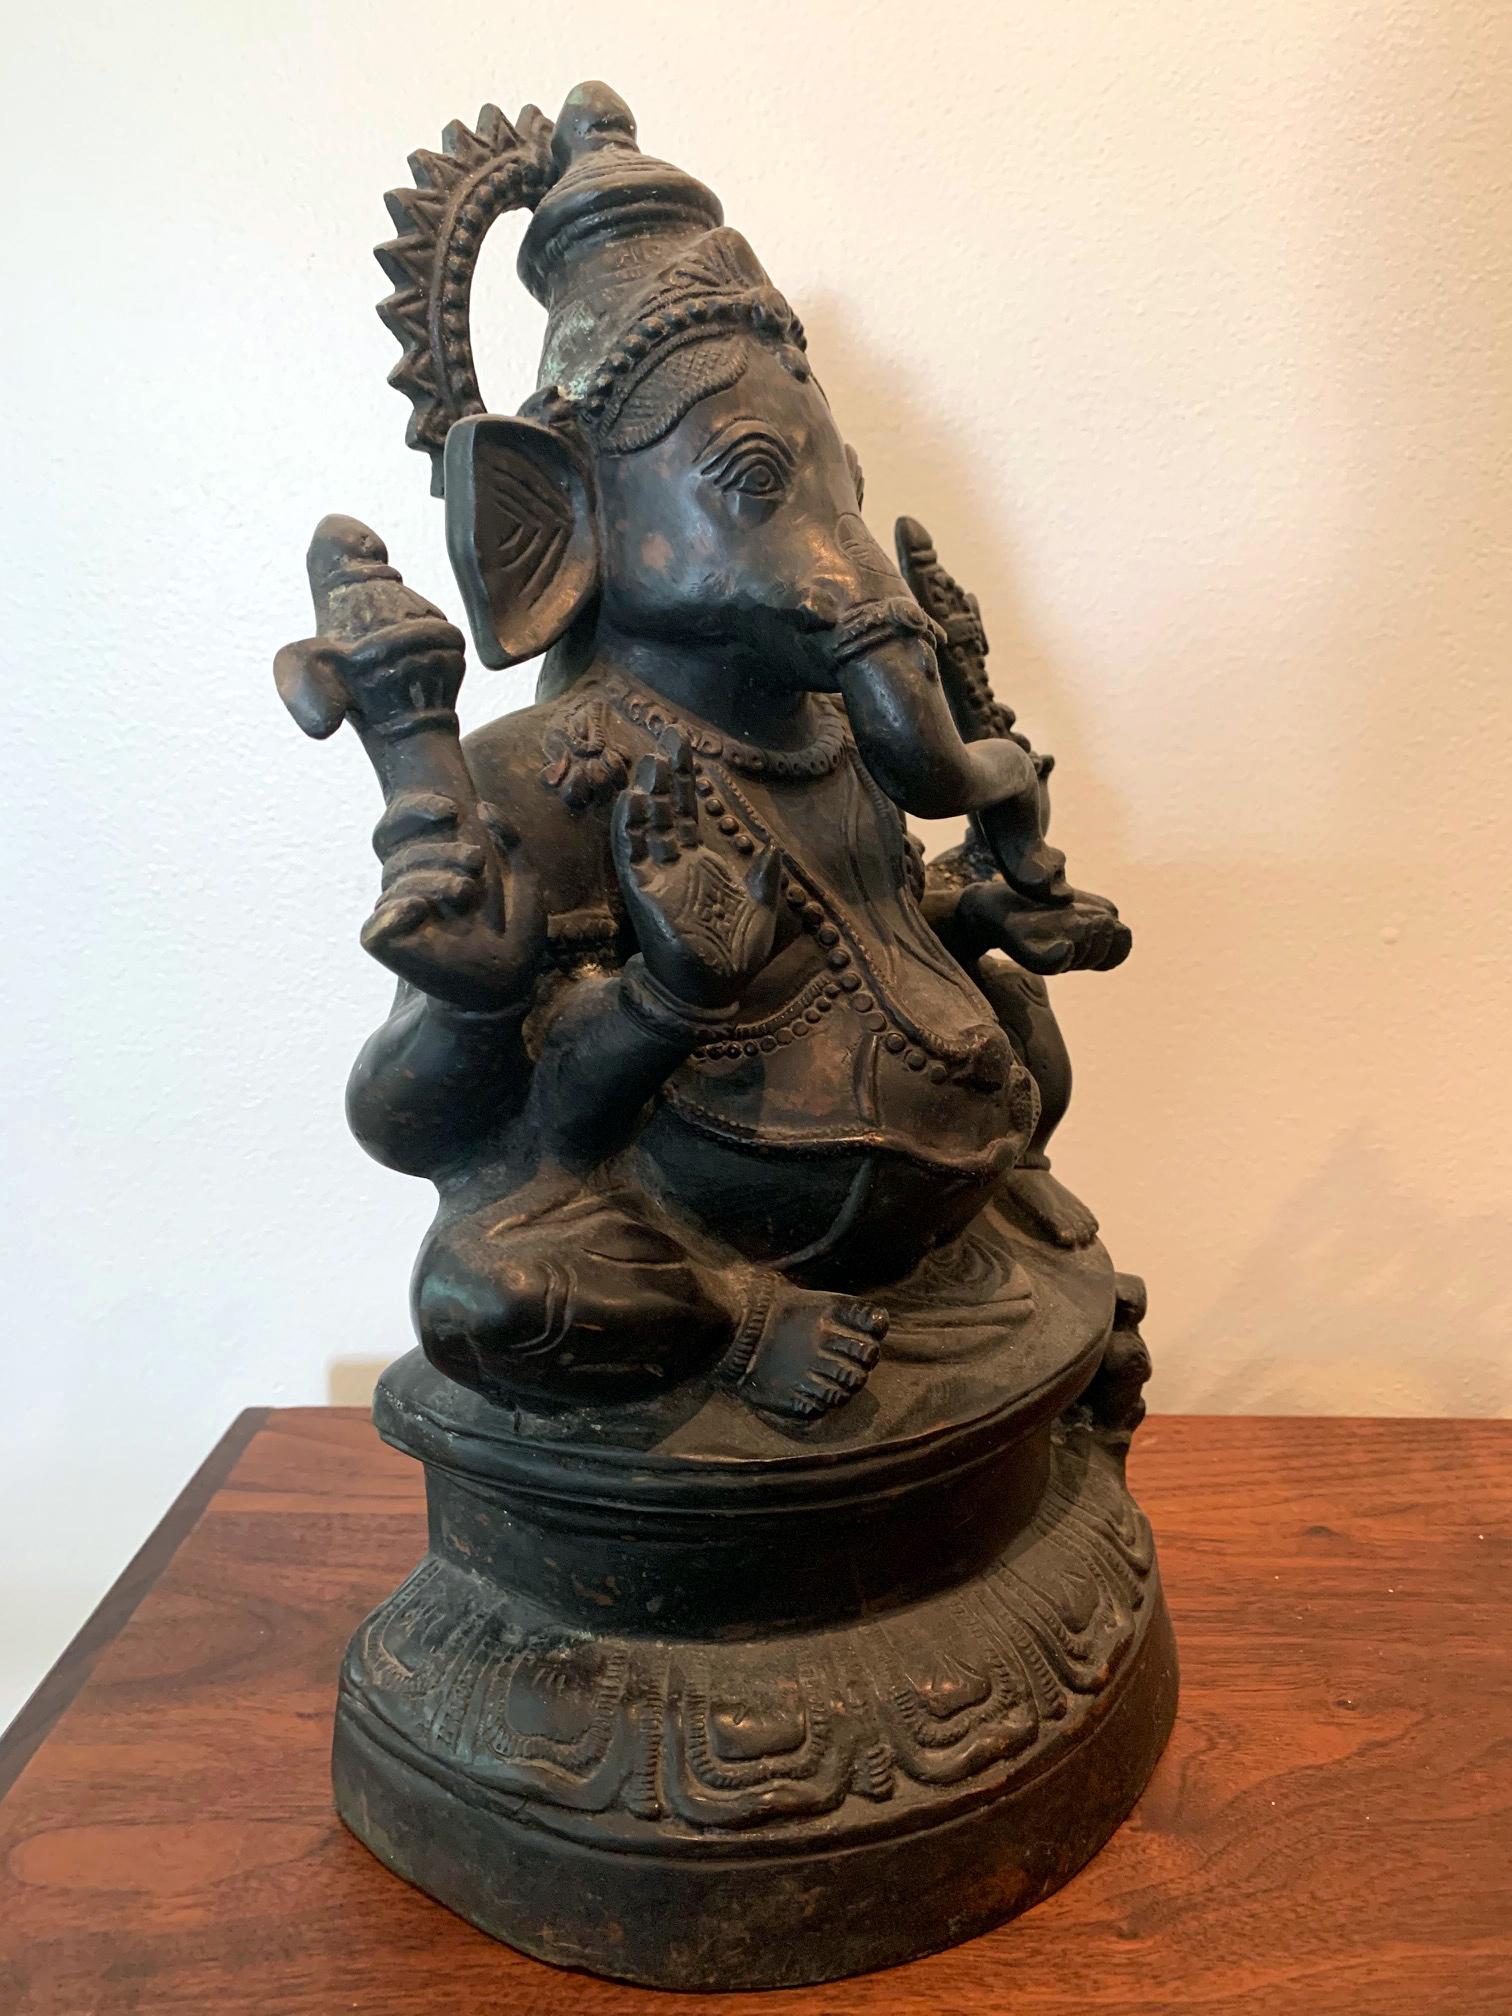 A heavily cast statue of Ganesh from early 20th century collected in Kandy, Sri Lanka. The semi-elephant semi-human deity is also known as Ganesha, Ganapati and Vinayaka. In the Hinduism, Ganesh has the statues of the most popularly worshiped god in